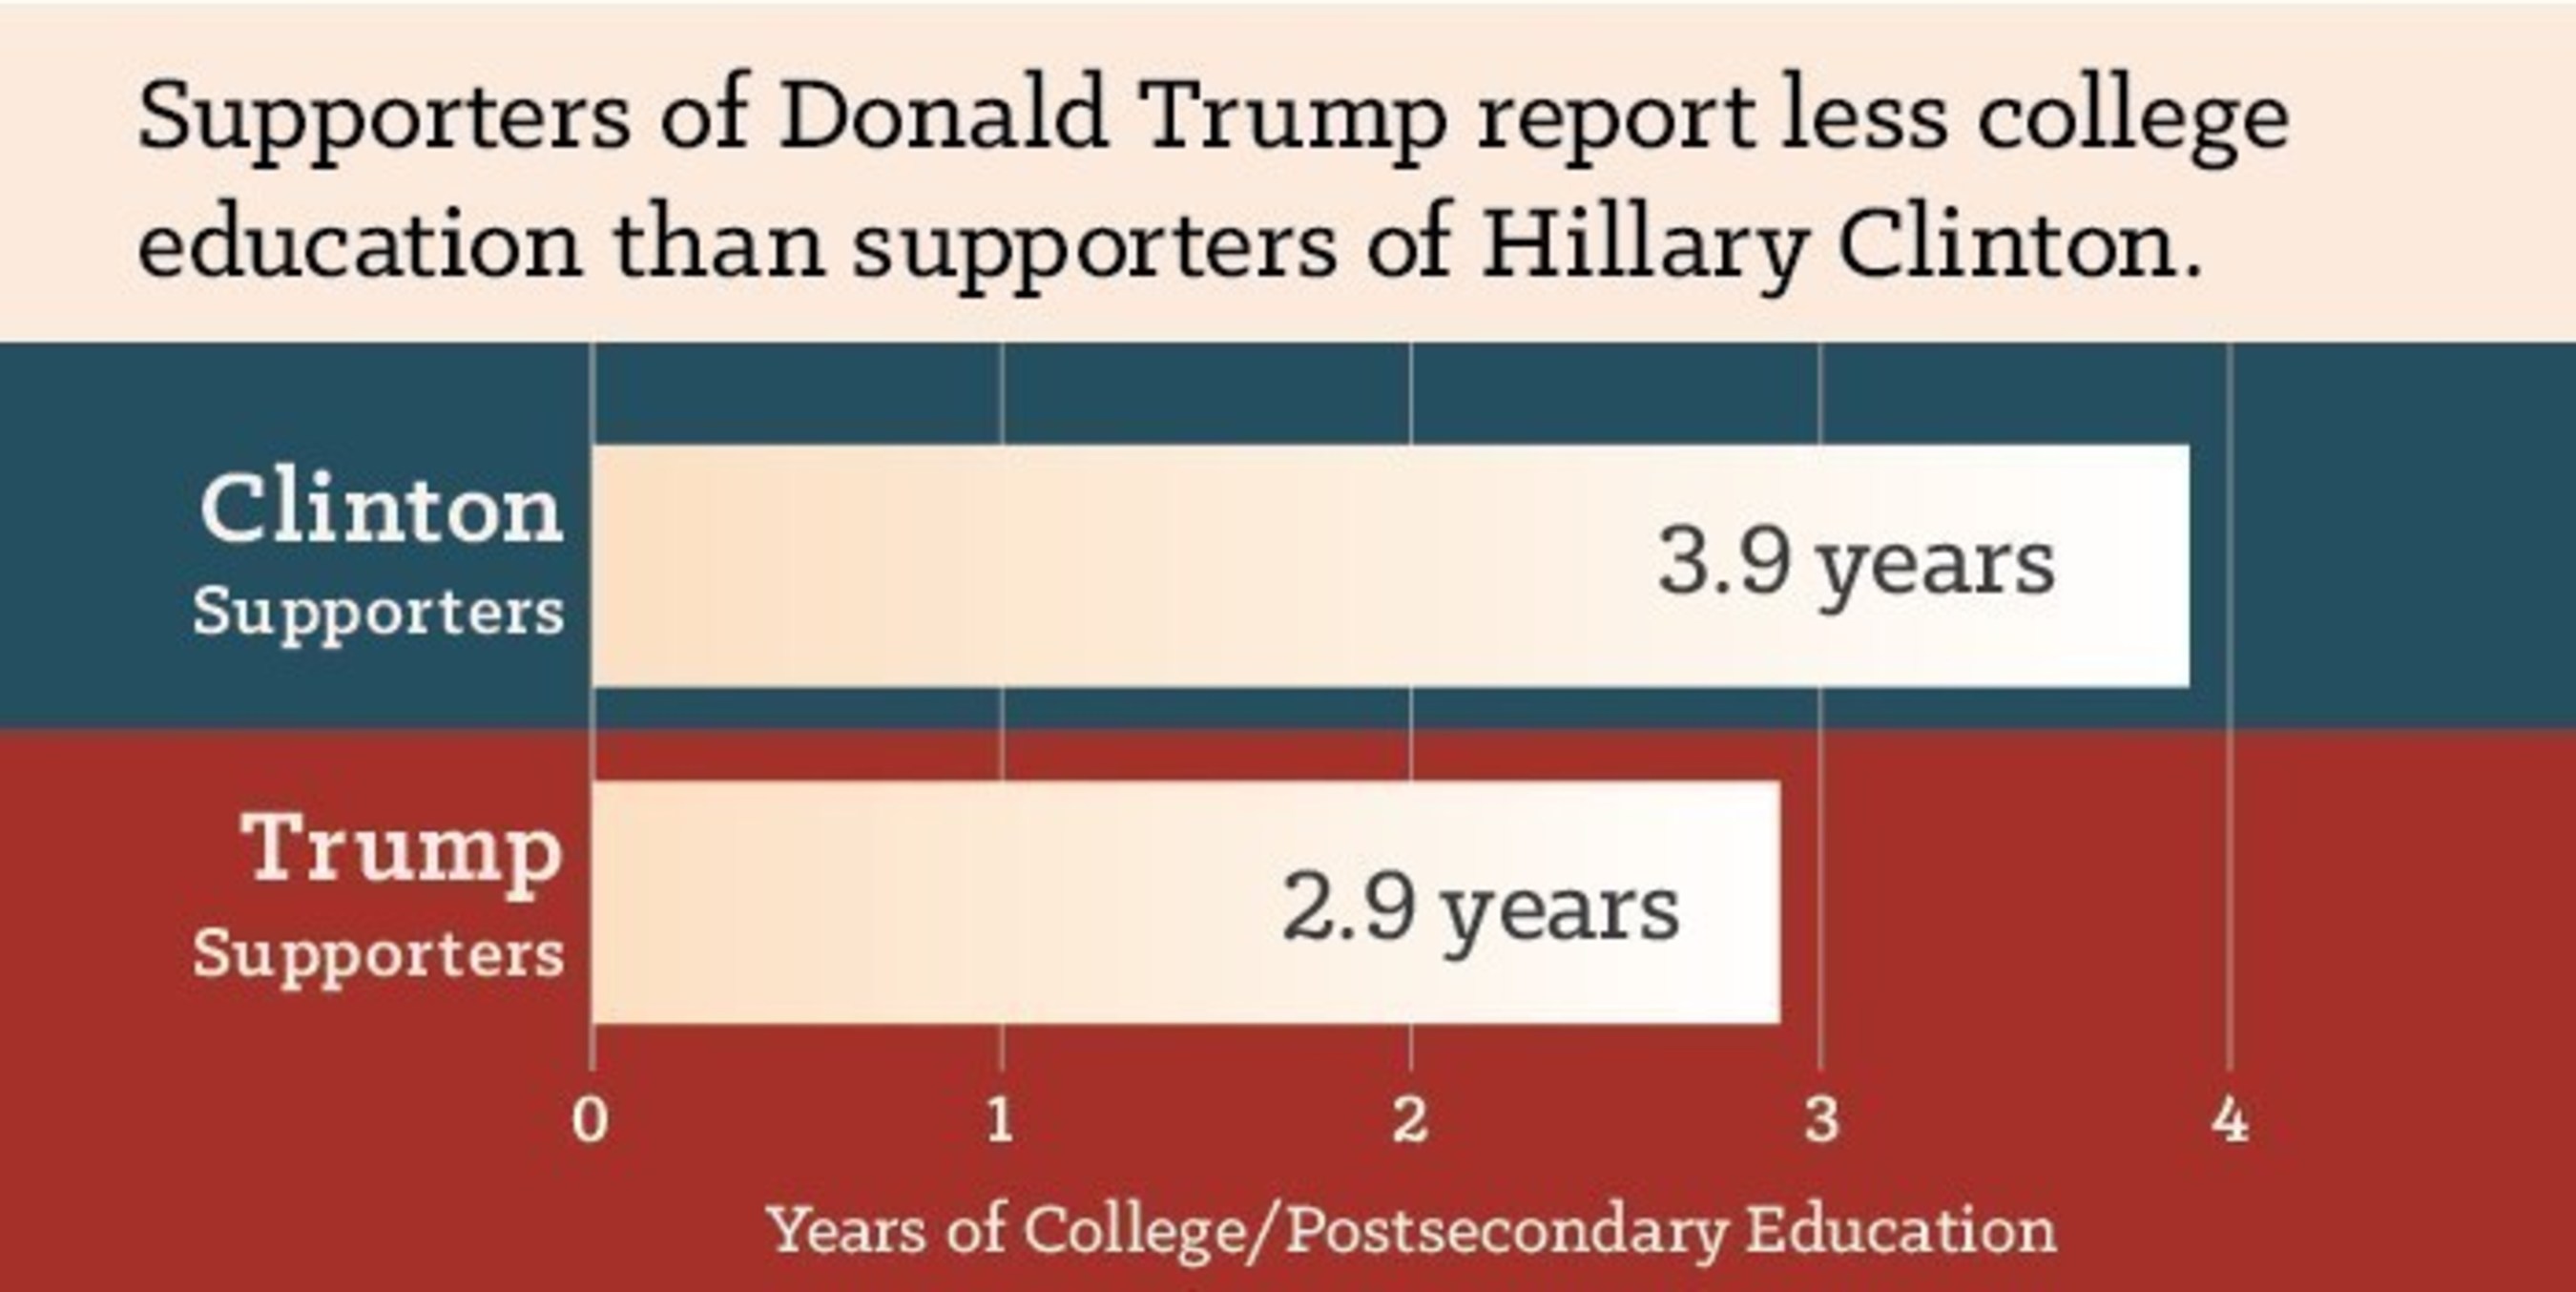 New Poll: Trump Supporters Use More Coupons, Attend Less College Than Clinton Supporters